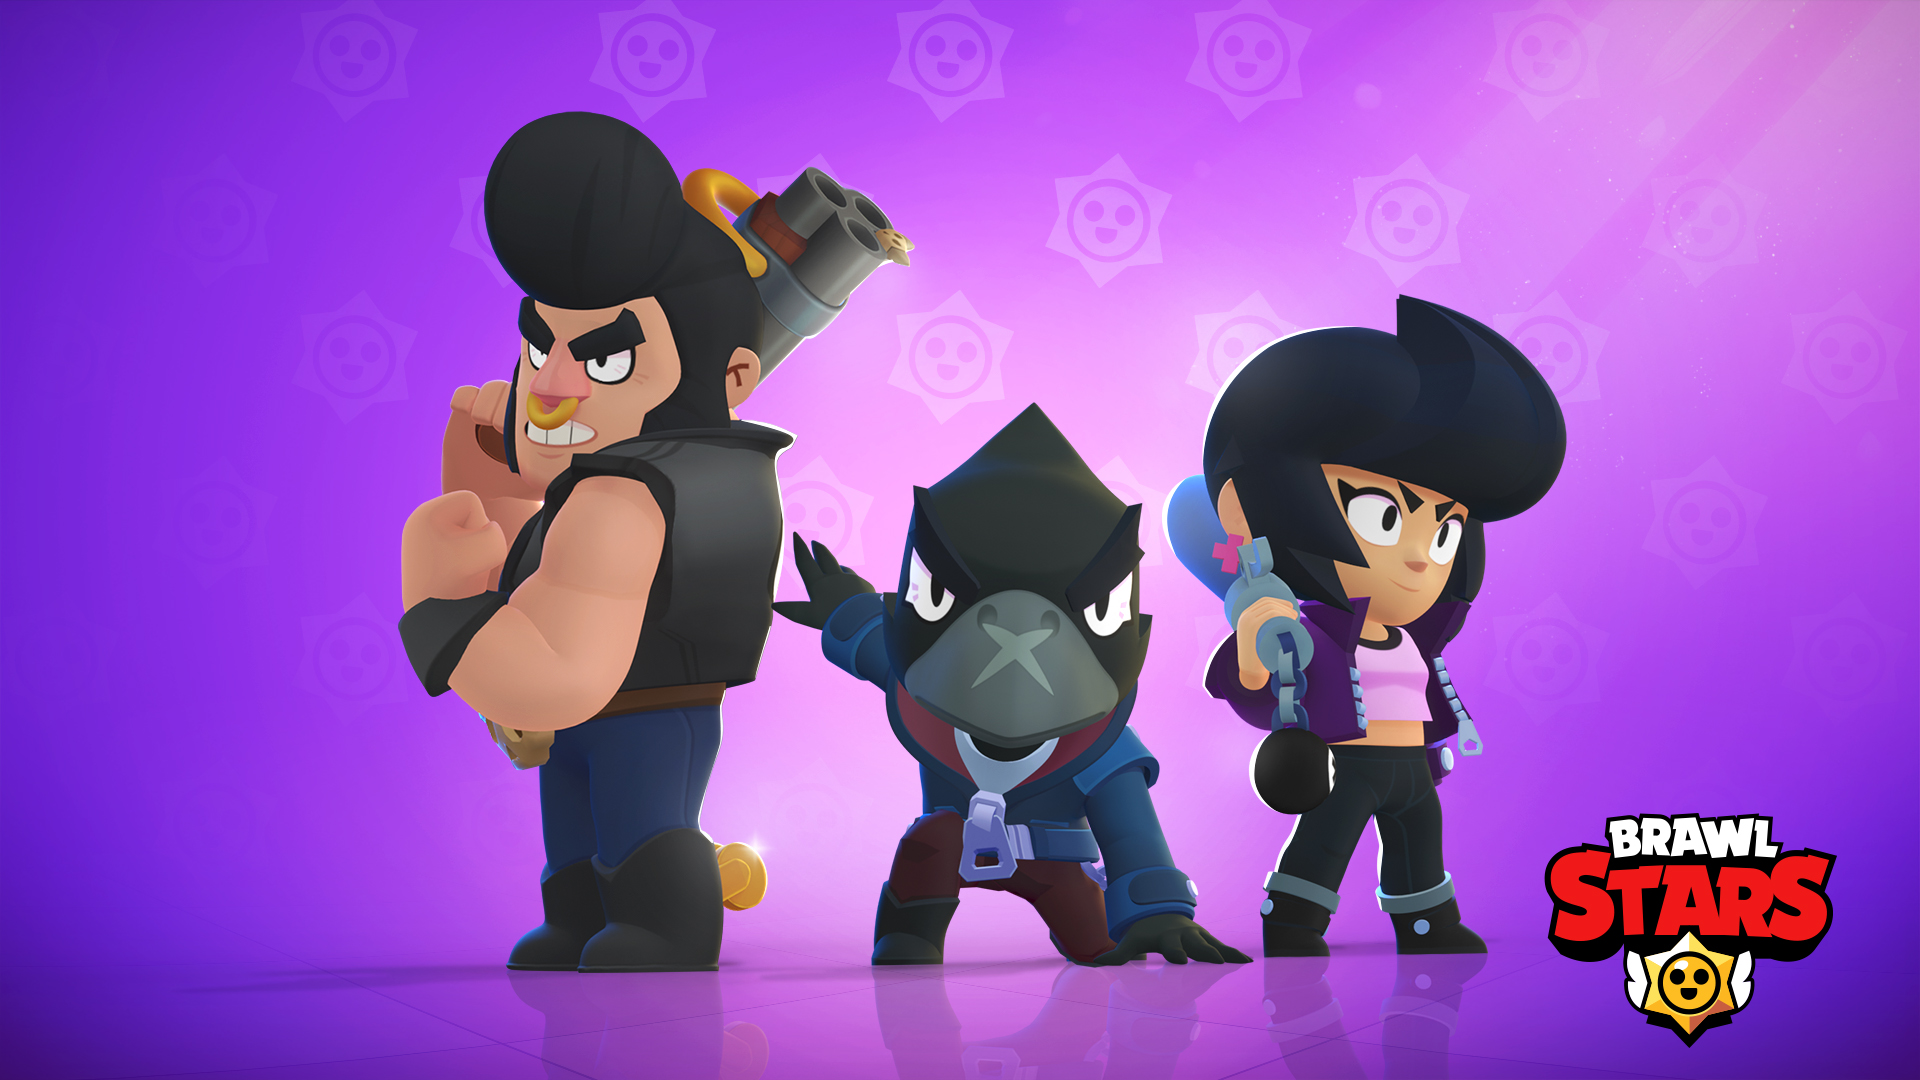 Brawl Stars On Twitter We Know Playing With Randoms Can Be Tough Sometimes So How About Trying Something Different Today Comment Below 1 Your Total Trophies 2 Your - how to remove friends on brawl stars